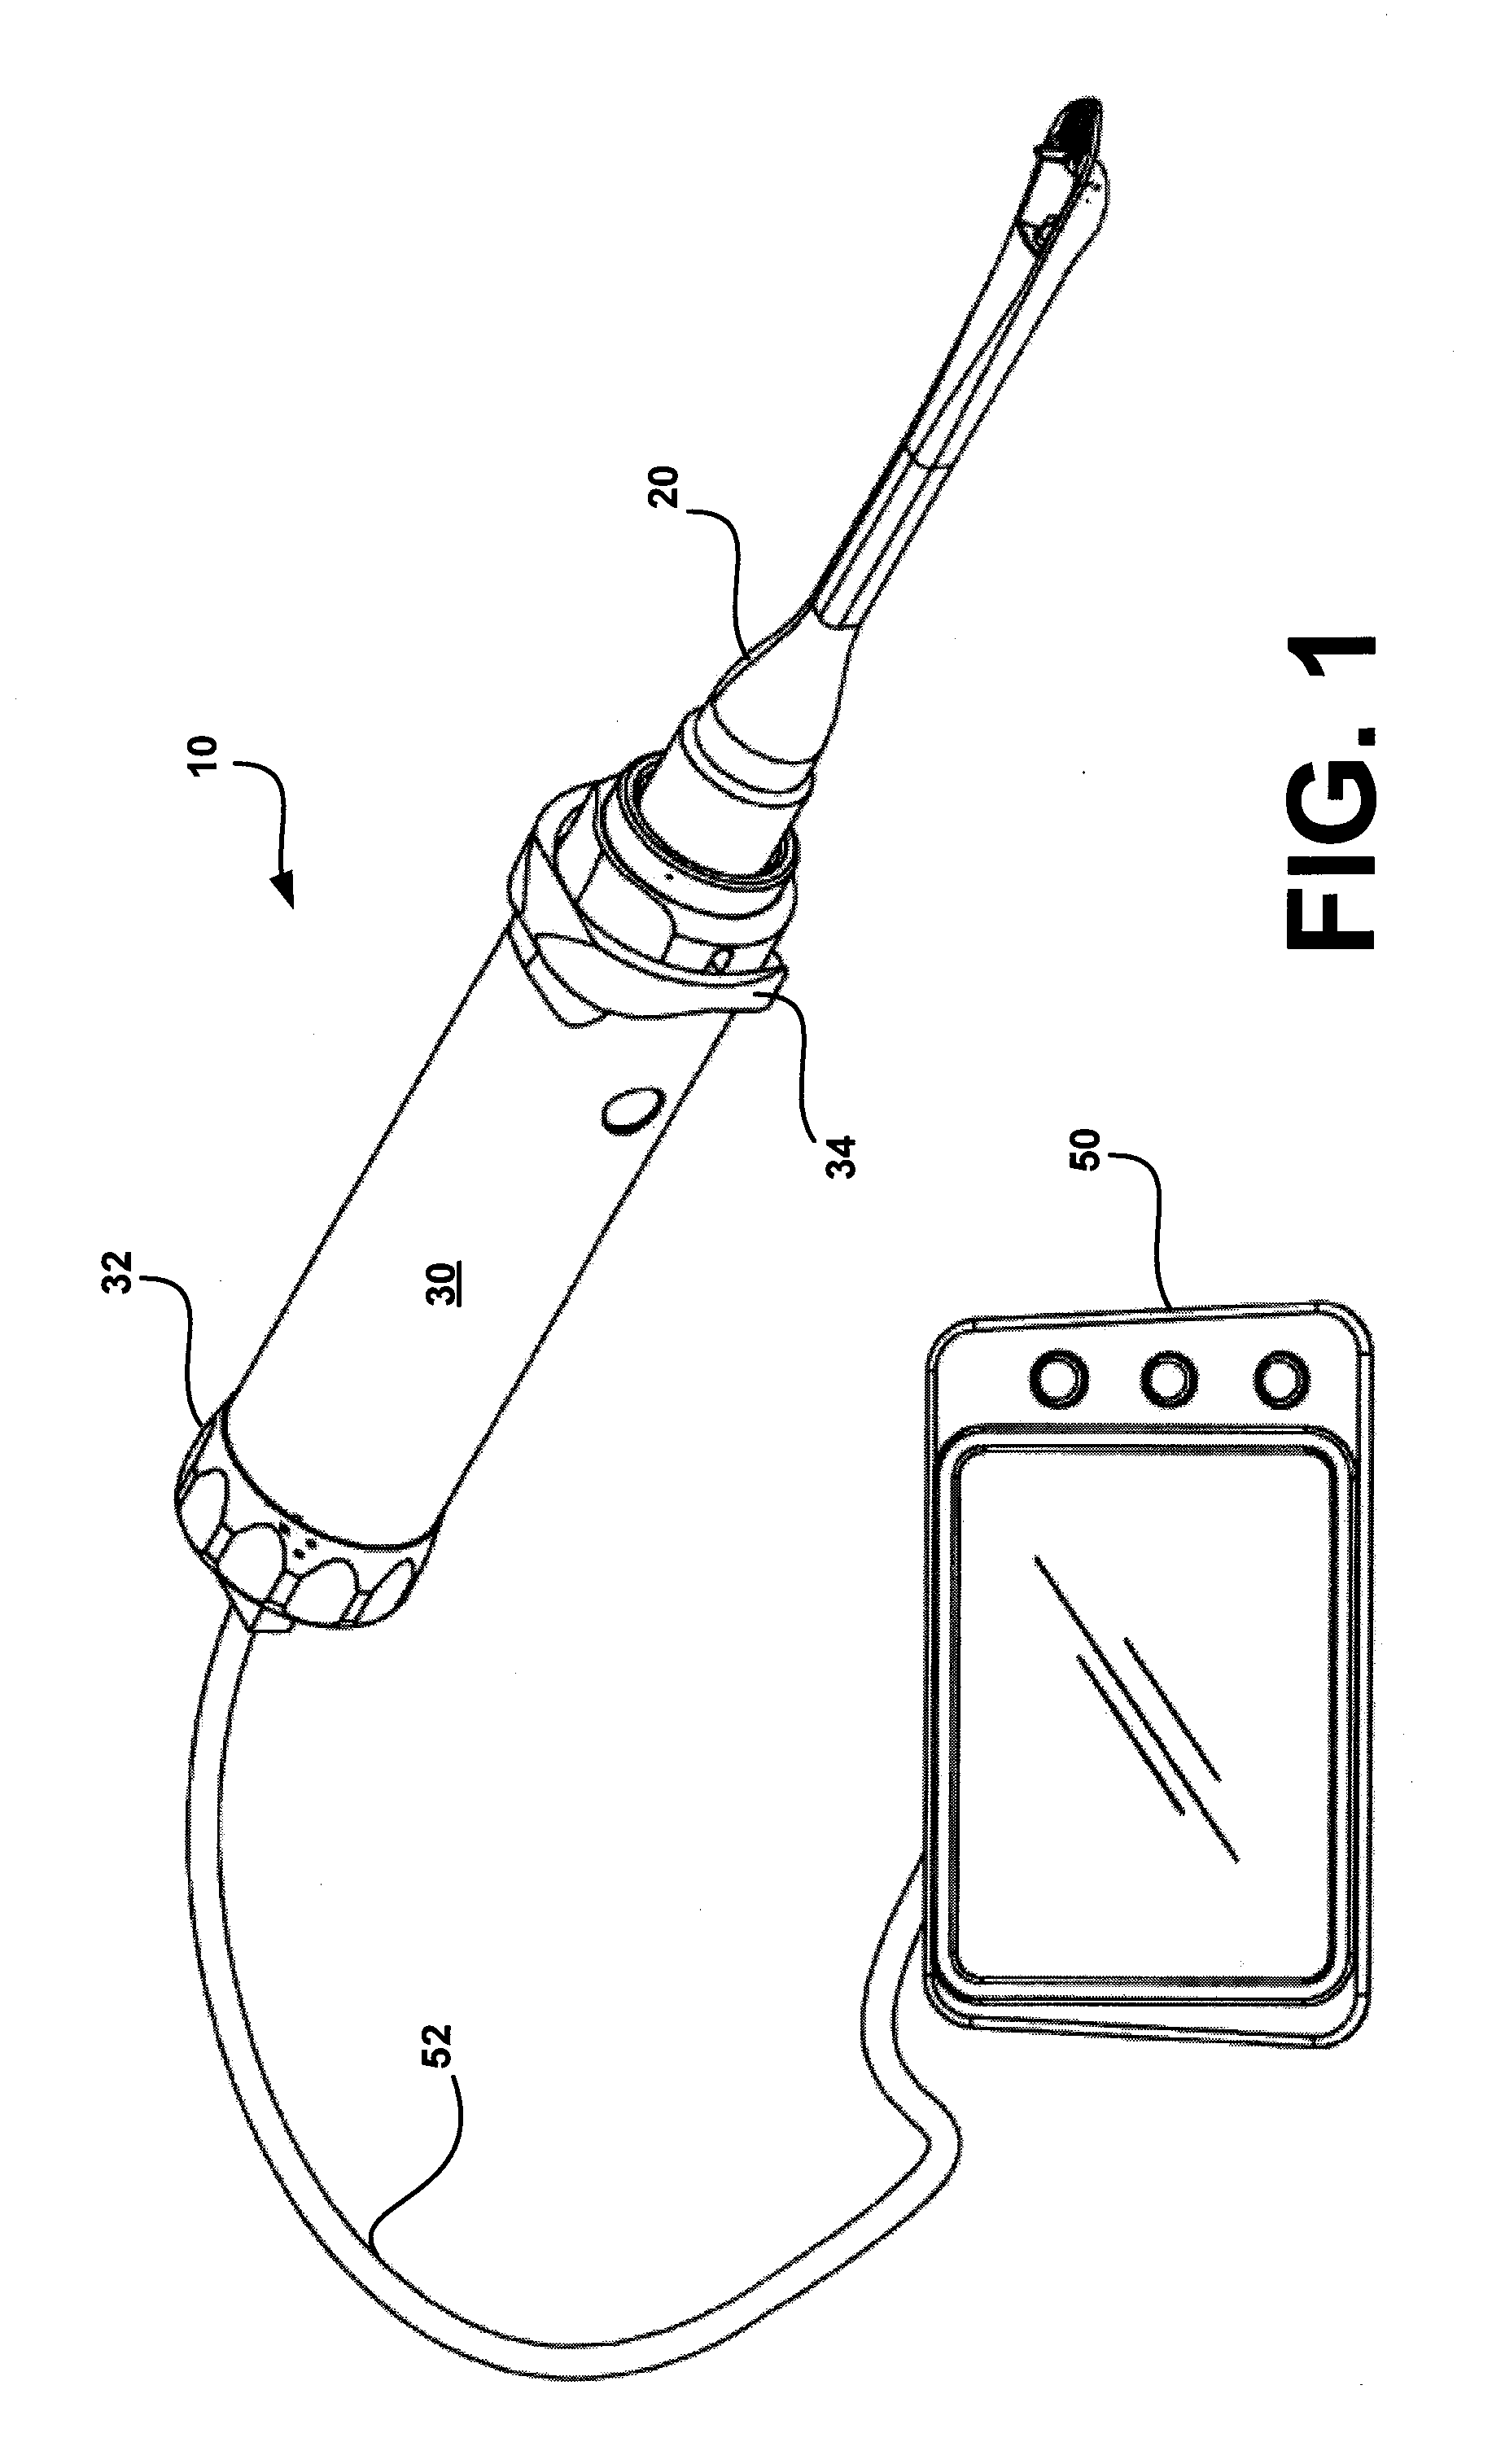 Endo-surgical device and method